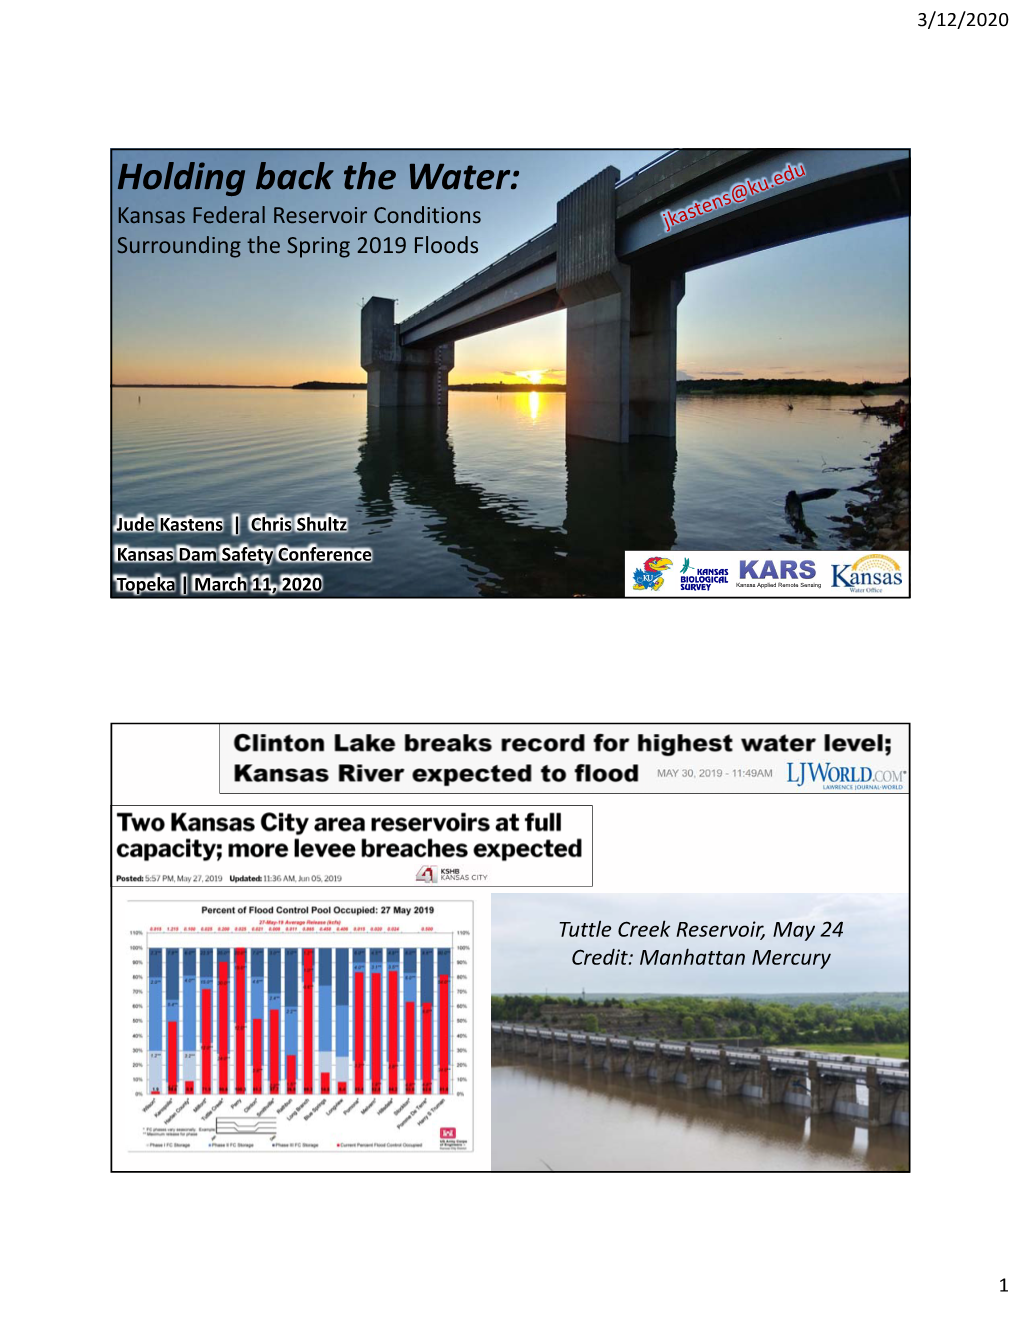 Holding Back the Water: Kansas Federal Reservoir Conditions Surrounding the Spring 2019 Floods